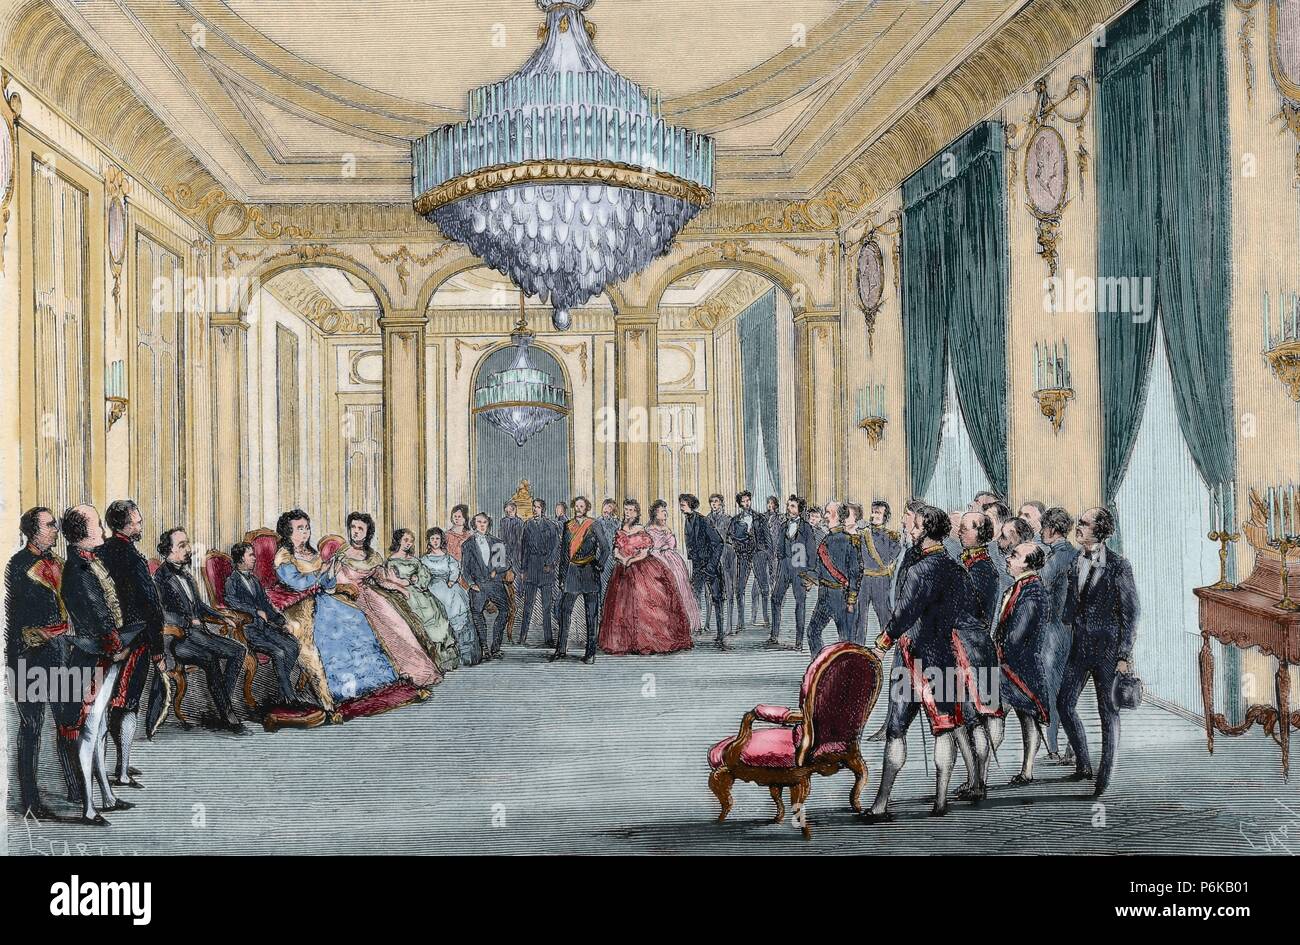 Isabella II of Spain (1830-1904). Queen of Spain. Abdication of Isabella of Bourbon in favour of her son Alphonse XII. June 25, 1870. Paris, France. Engraving by Capuz. The Spanish and American Illustration, 1870. Colored. Stock Photo